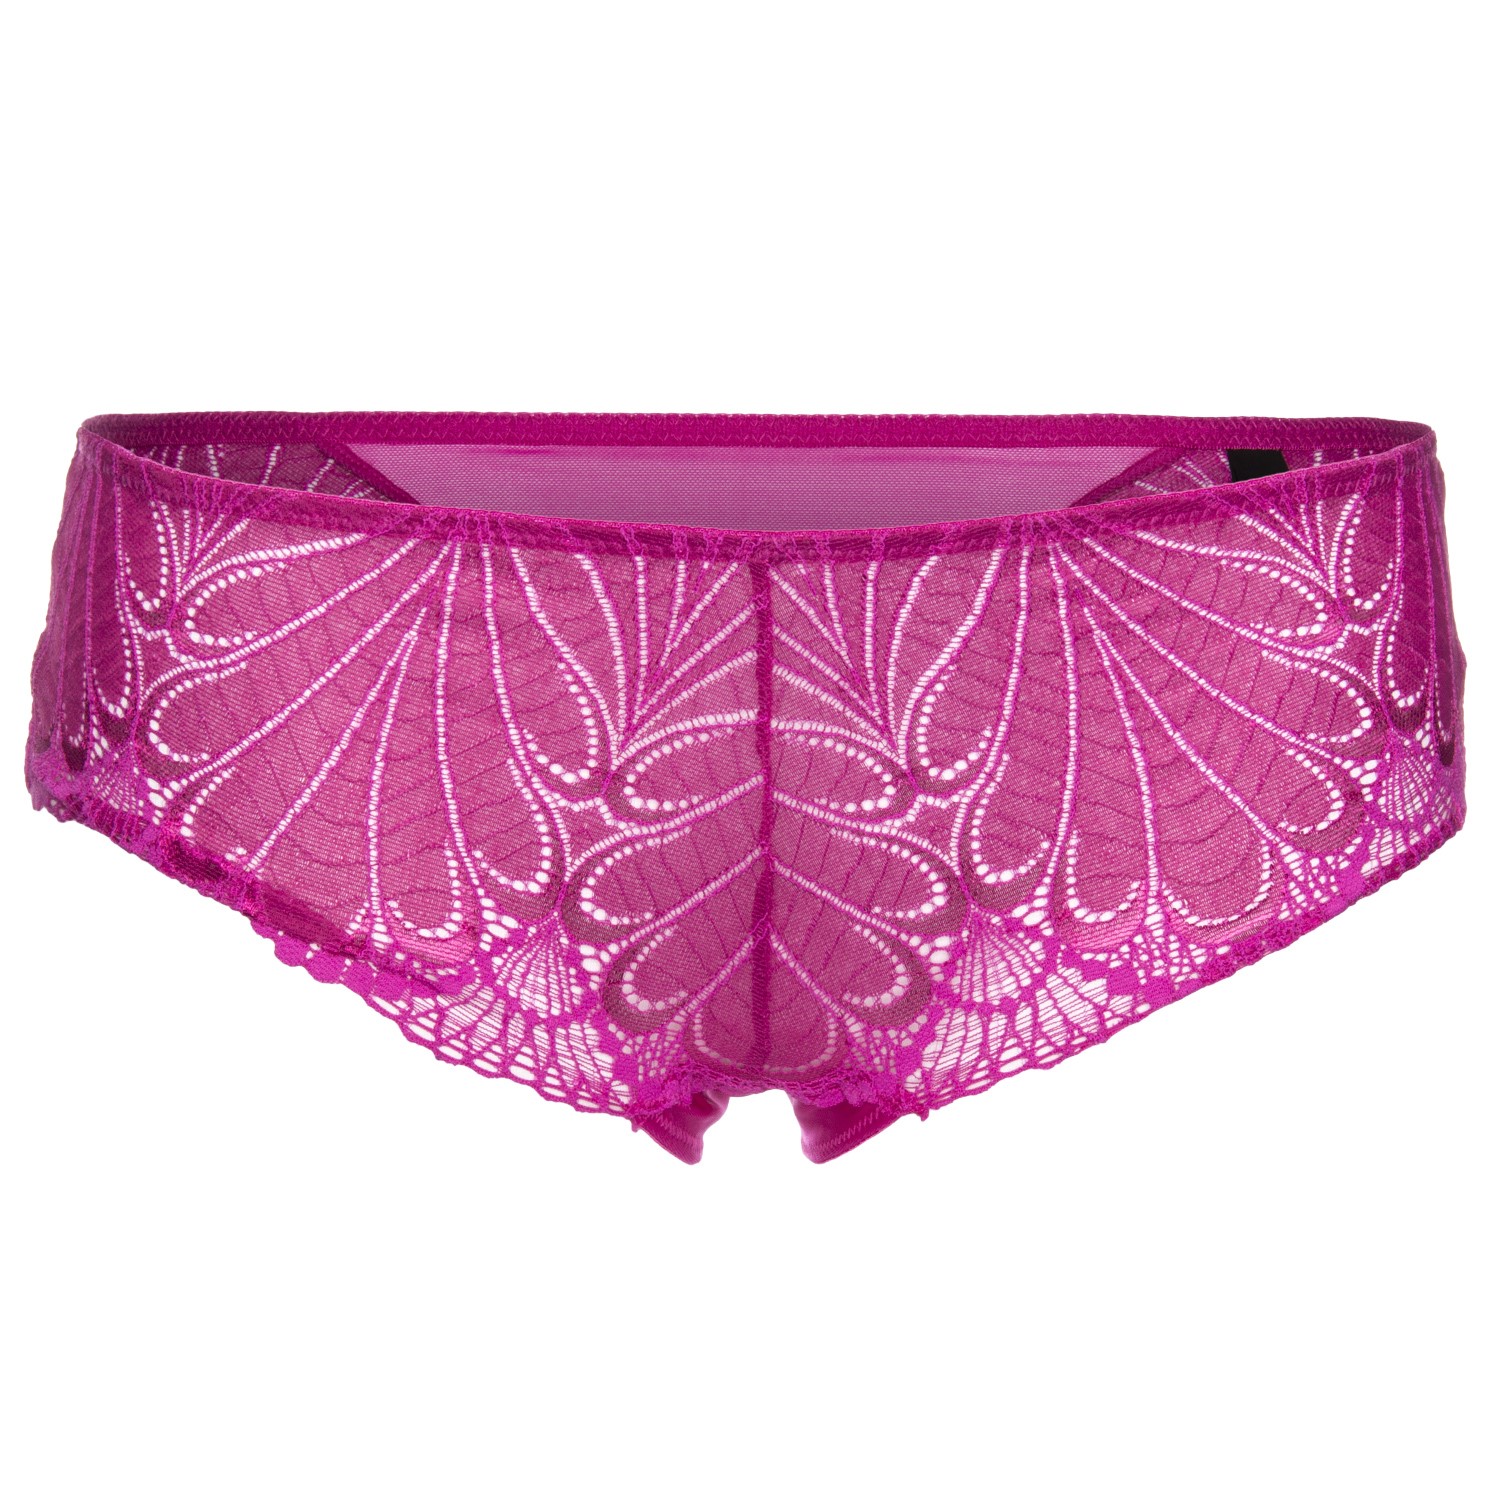 Wonderbra Refined Glamour Shorty Lux Pink